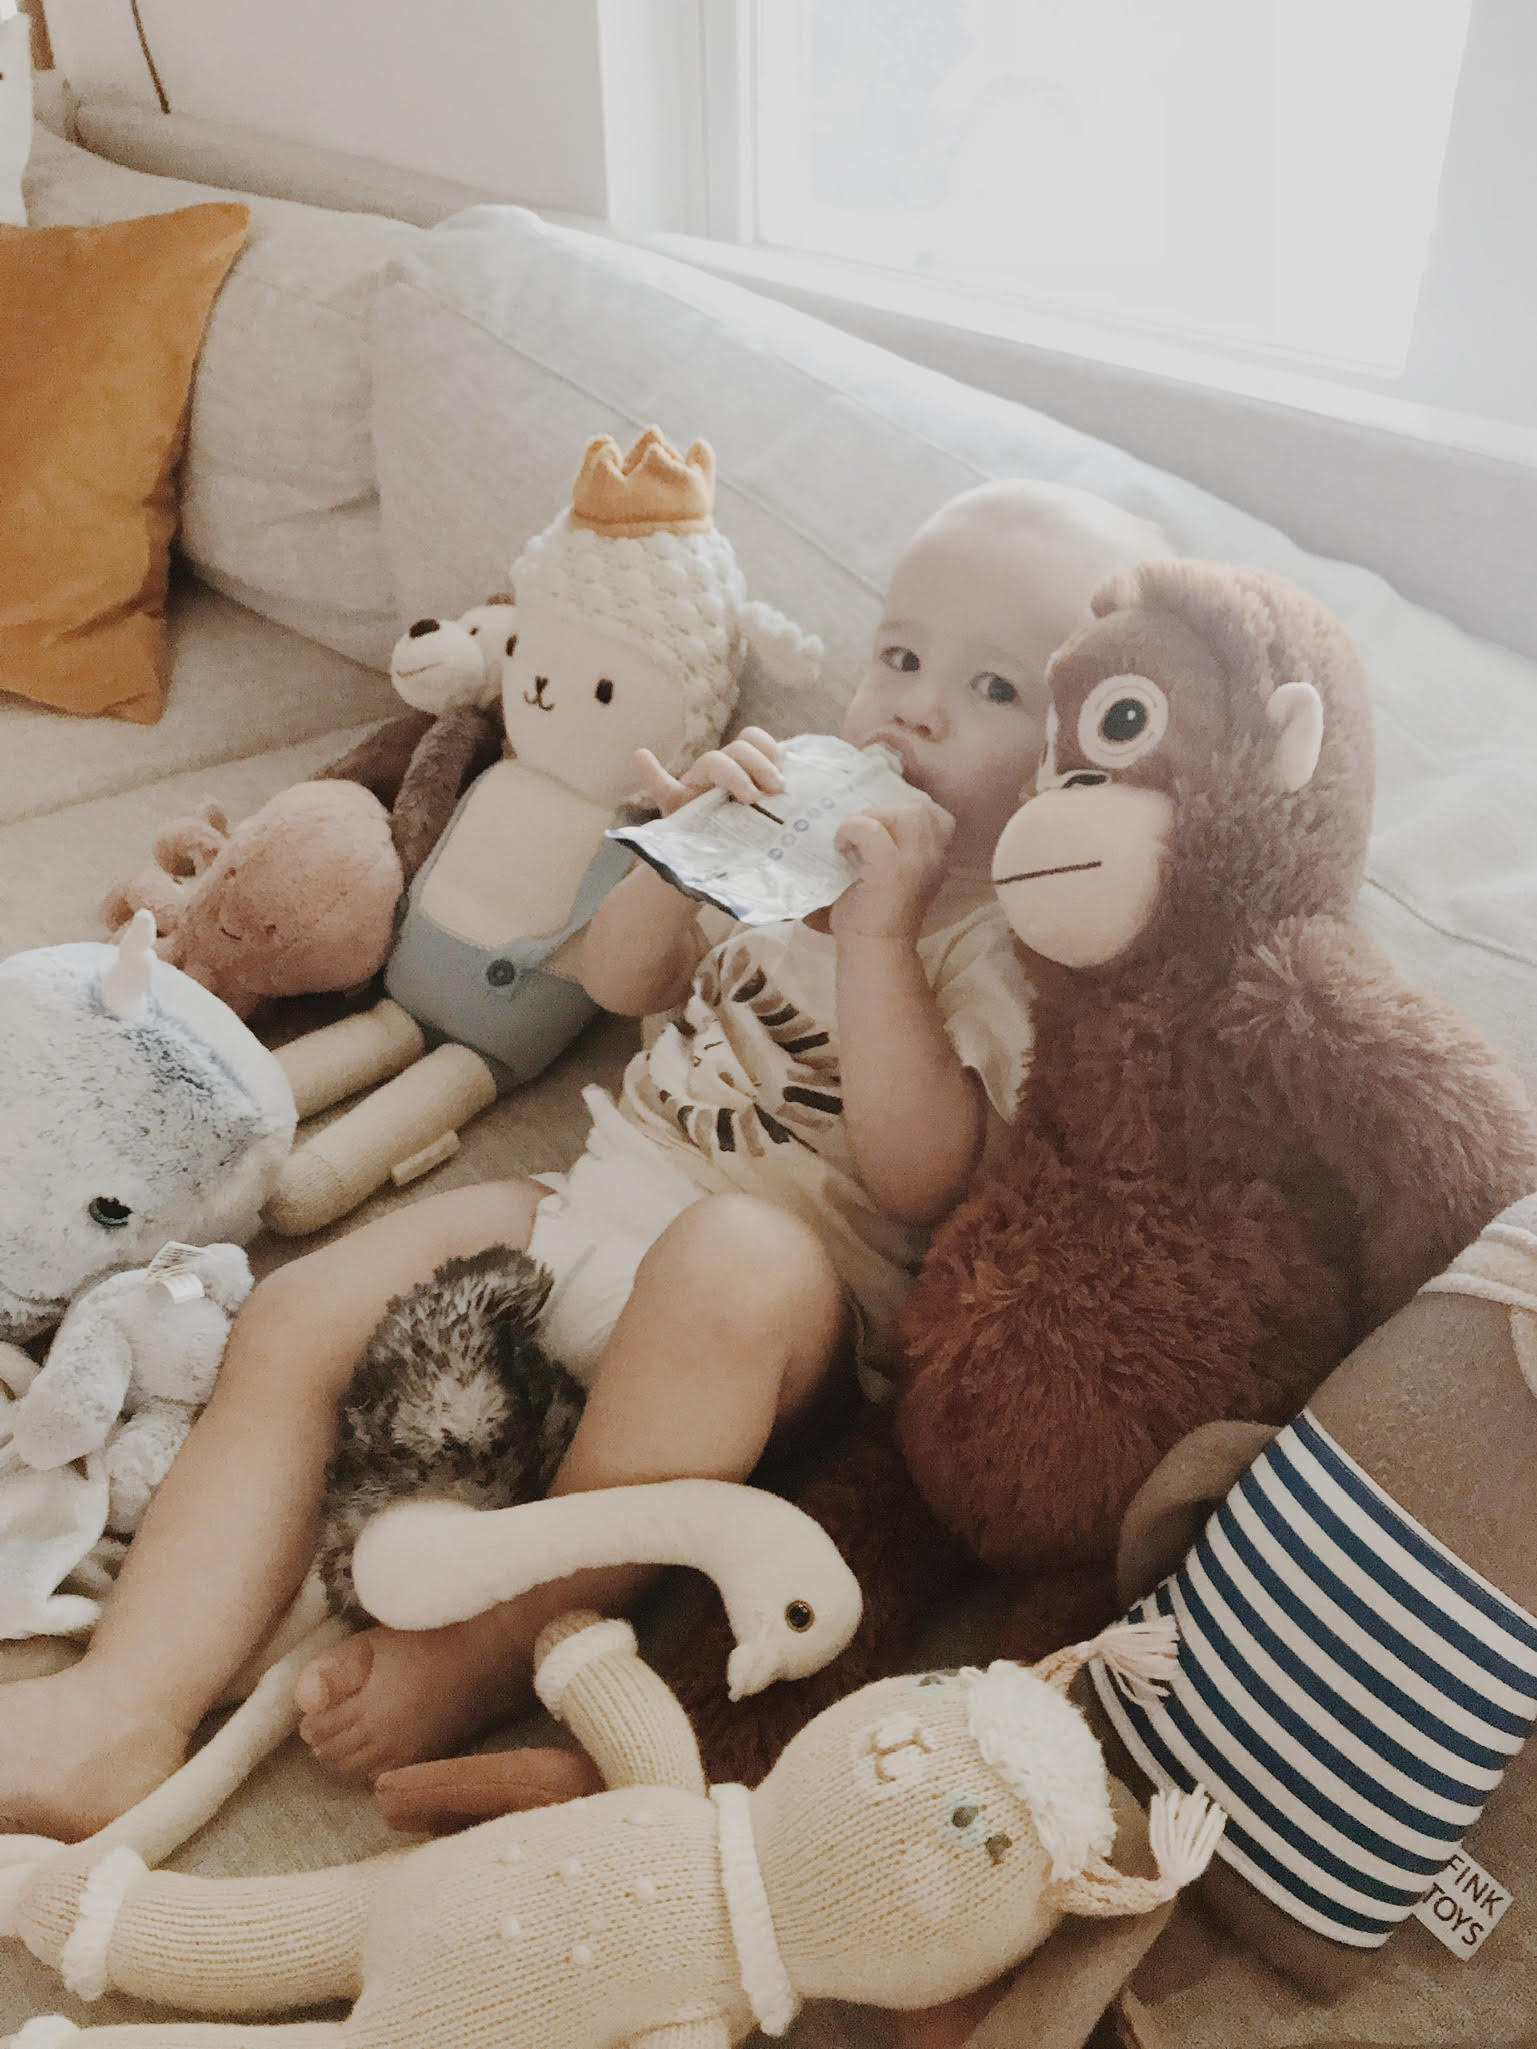 cute stuffed animal roundup – almost makes perfect